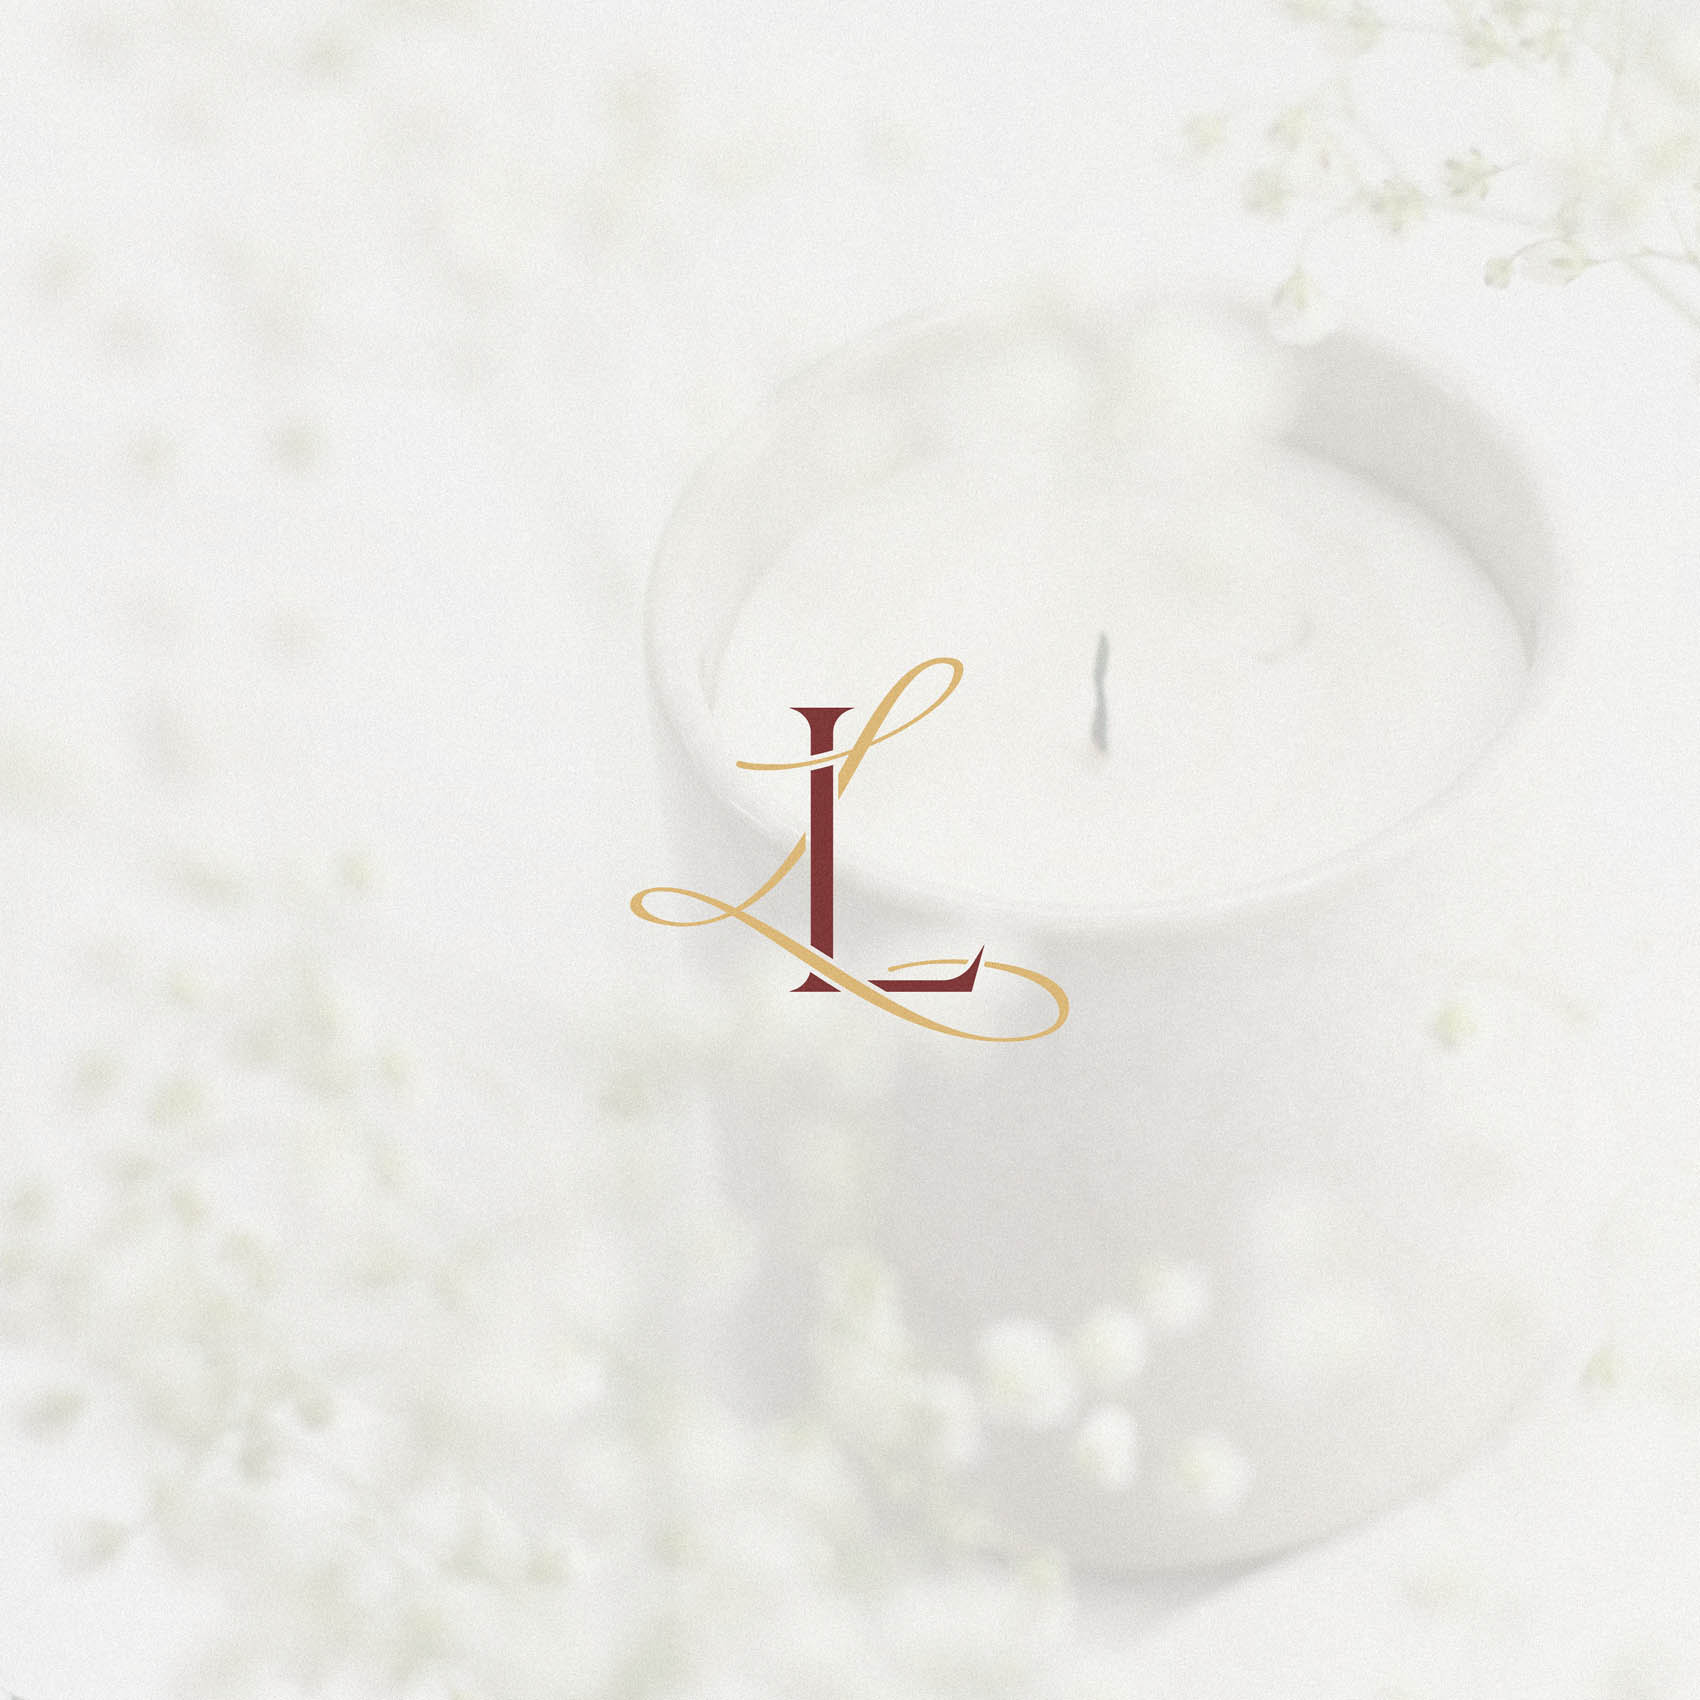 Lacey & Lacey - Luxury Candle Packaging Logo & Brand Identity18